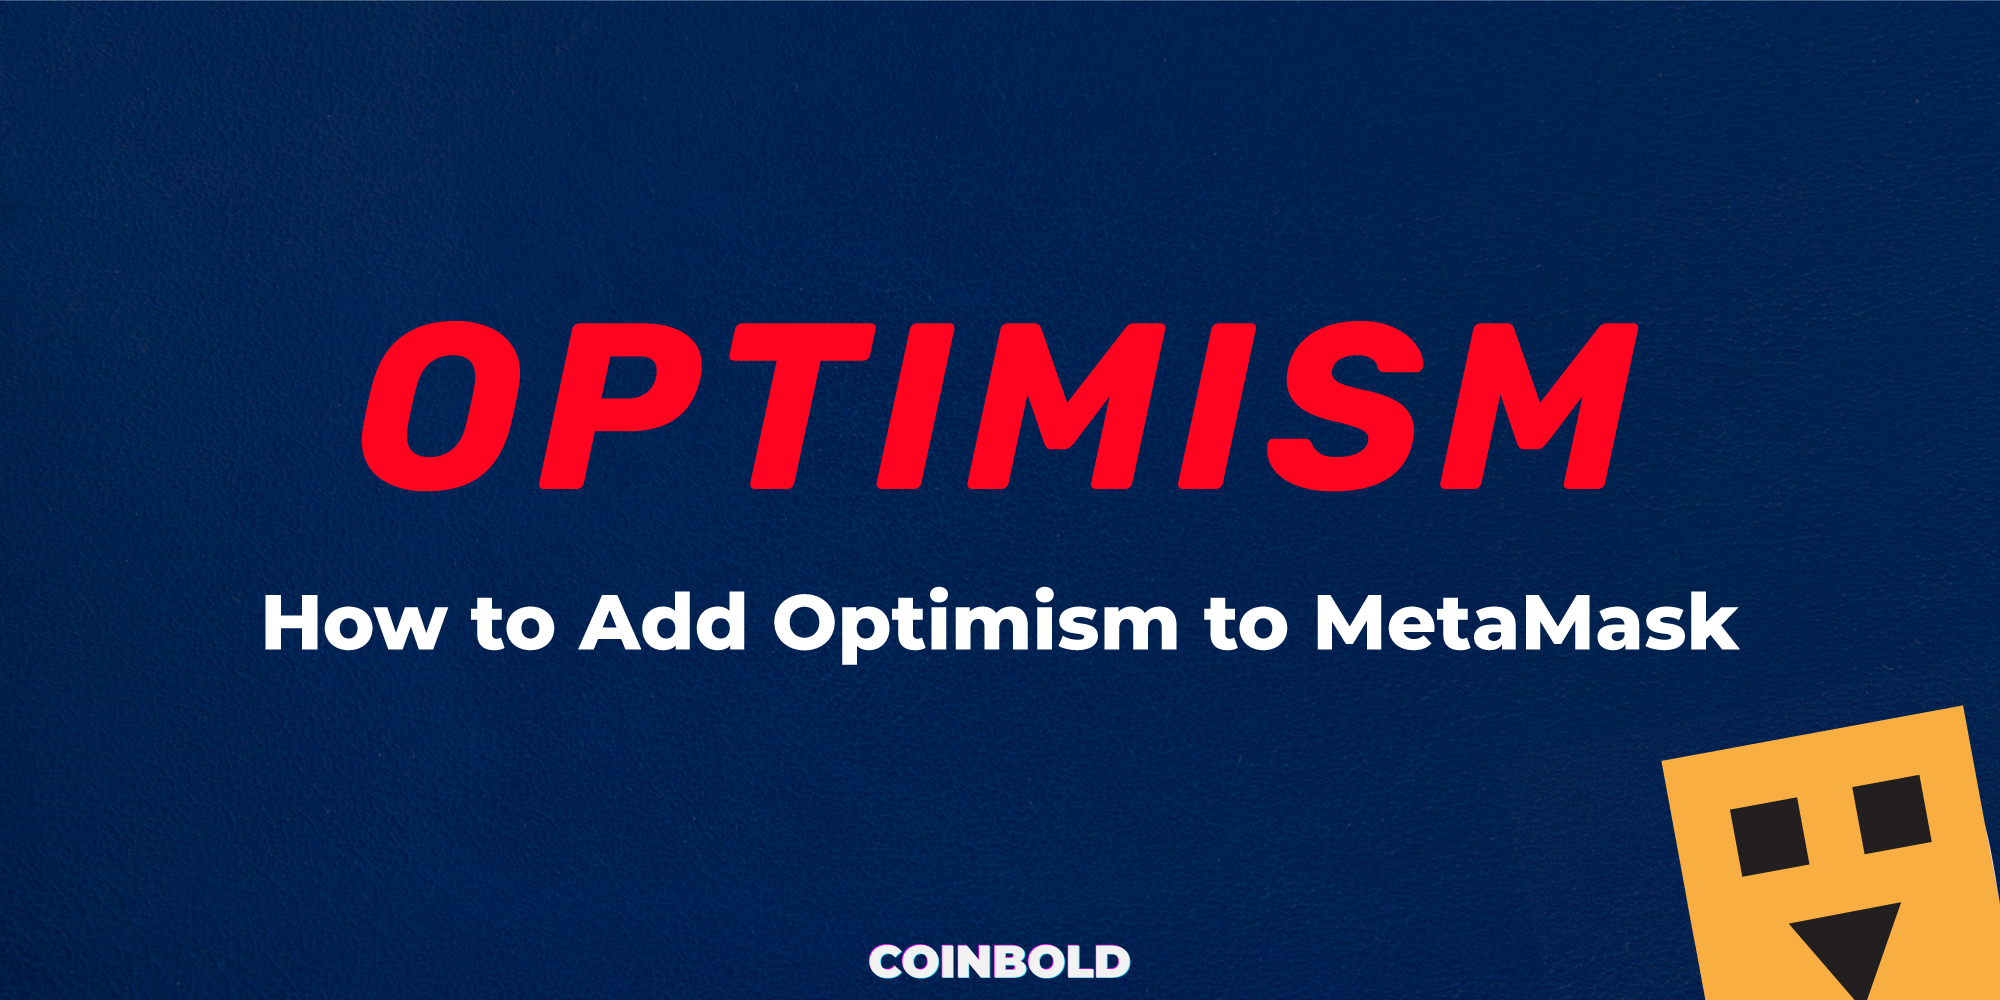 How to Add Optimism to MetaMask